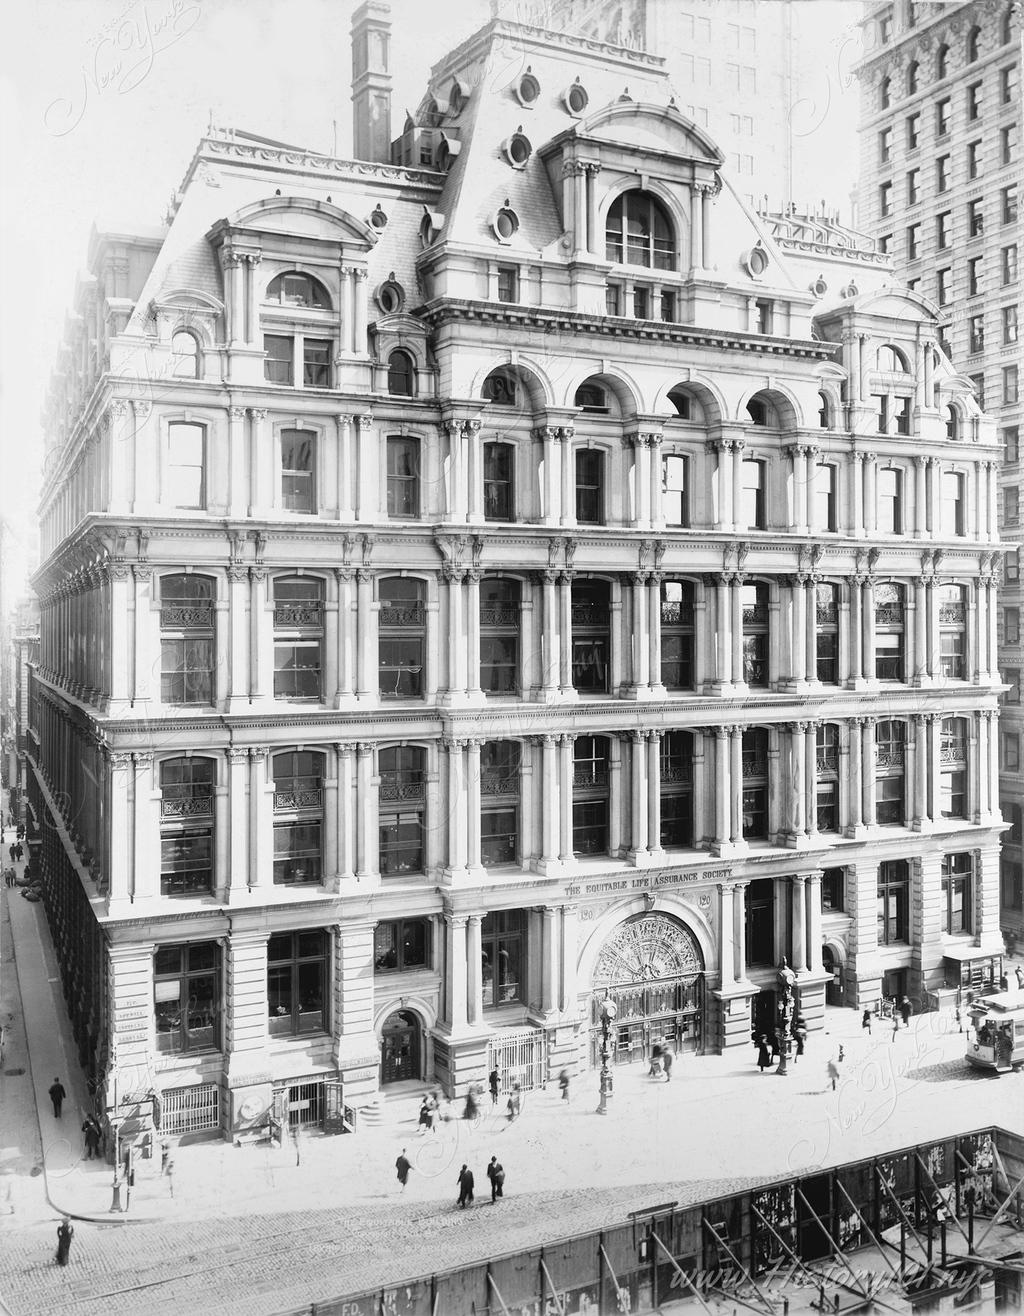 The Equitable Building was completed in 1870 and is part of history for being the world's first office building to feature passenger elevators.